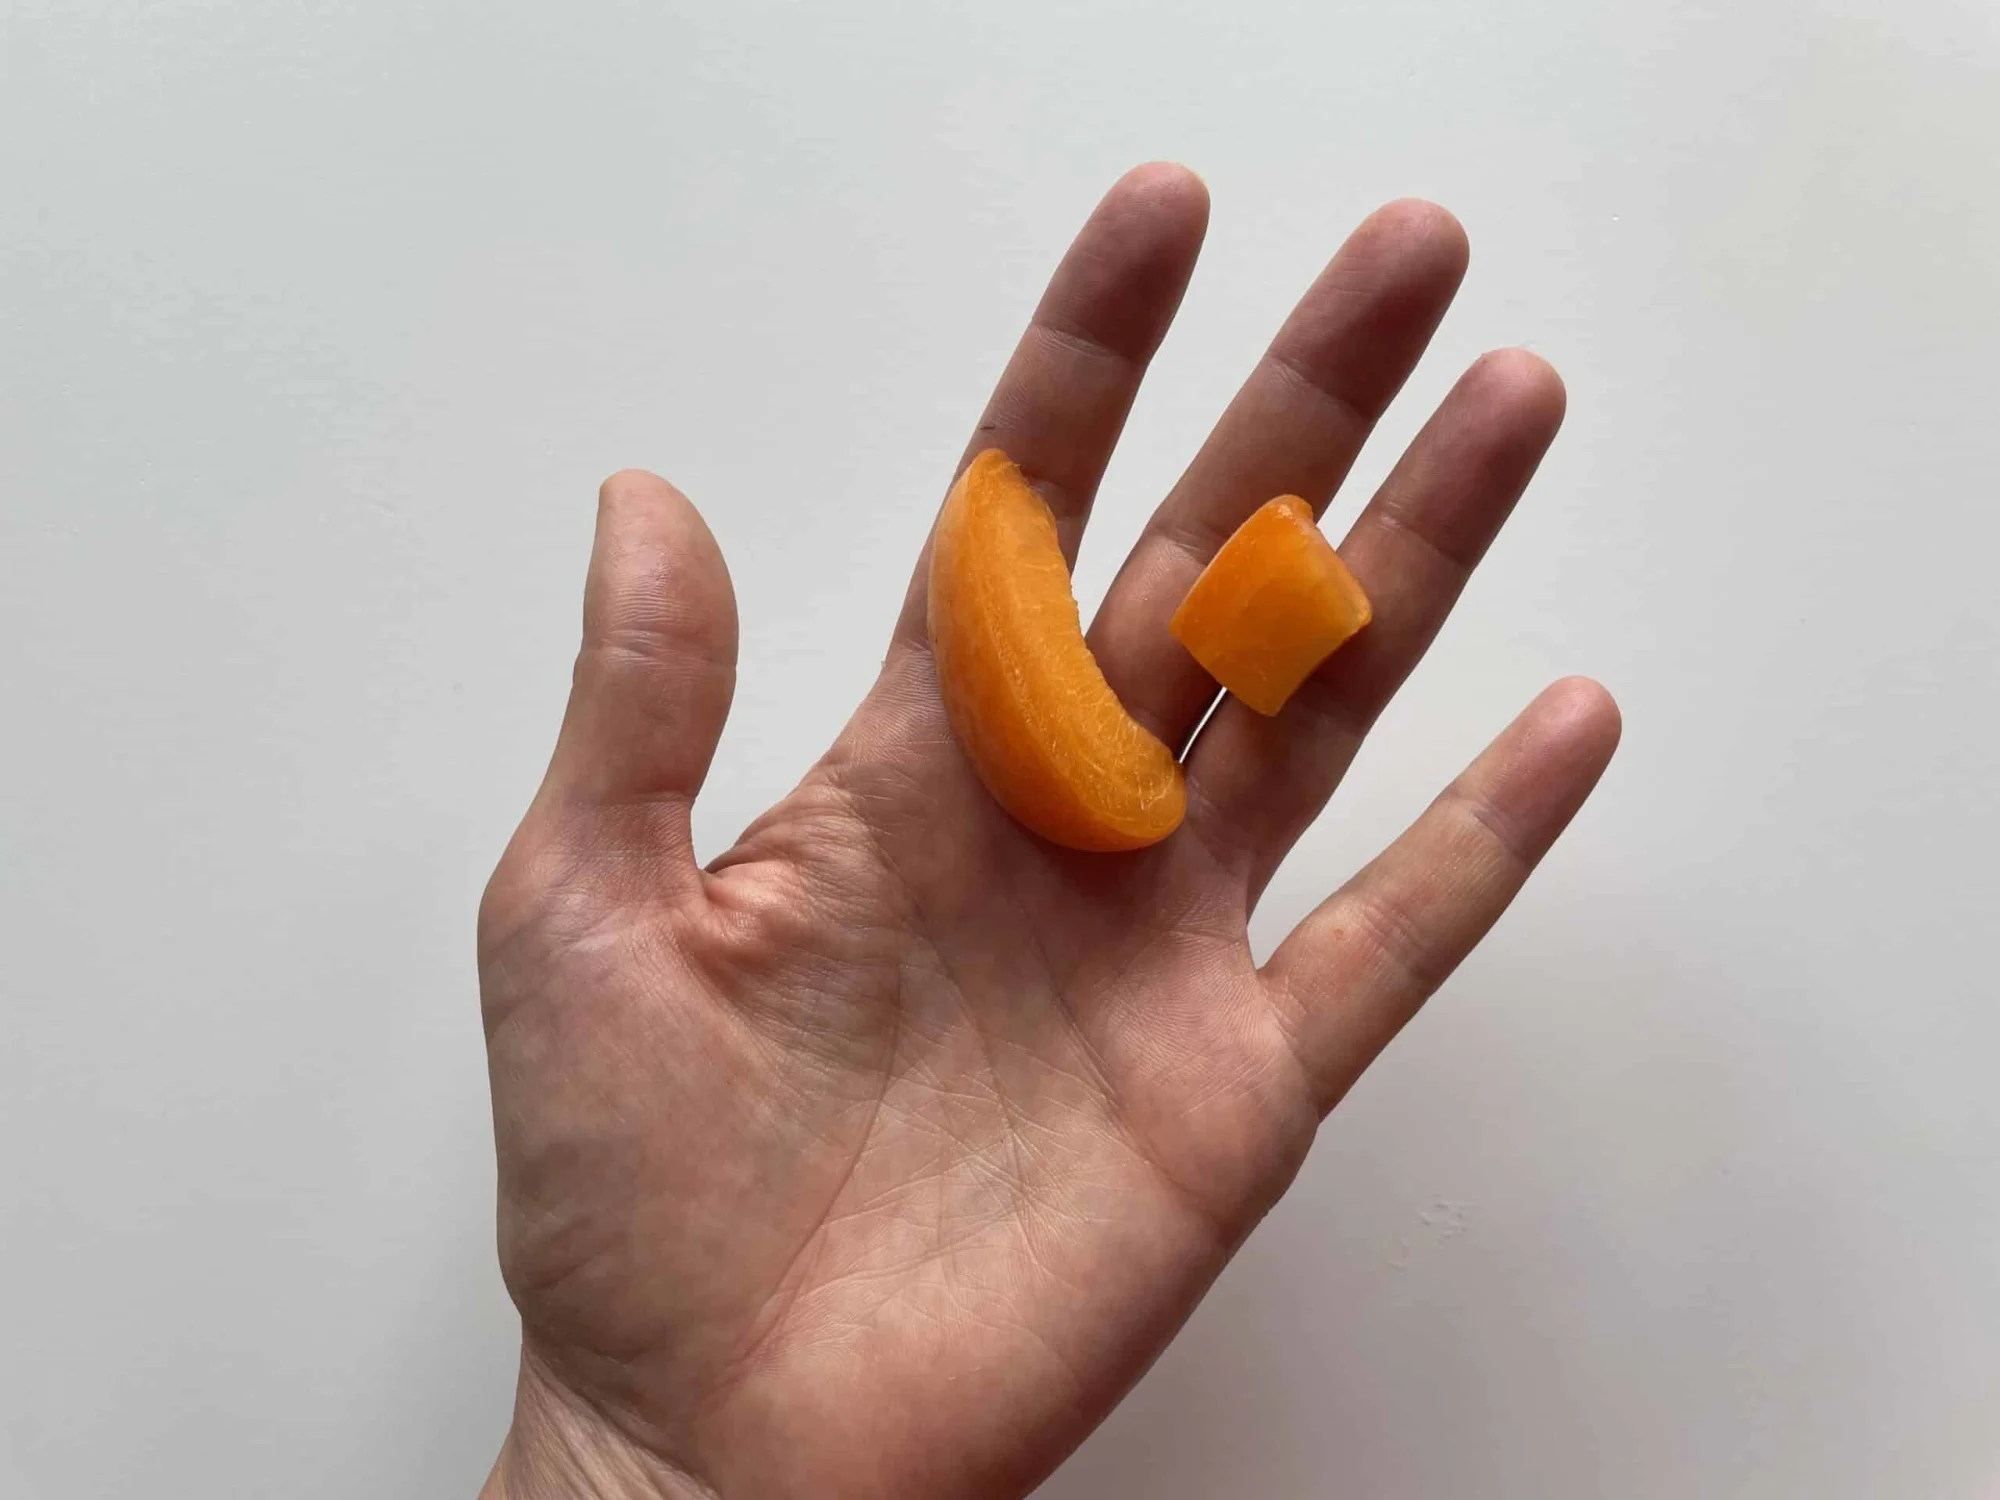 a hand holding one slice and one bite-sized pieces of ripe apricot